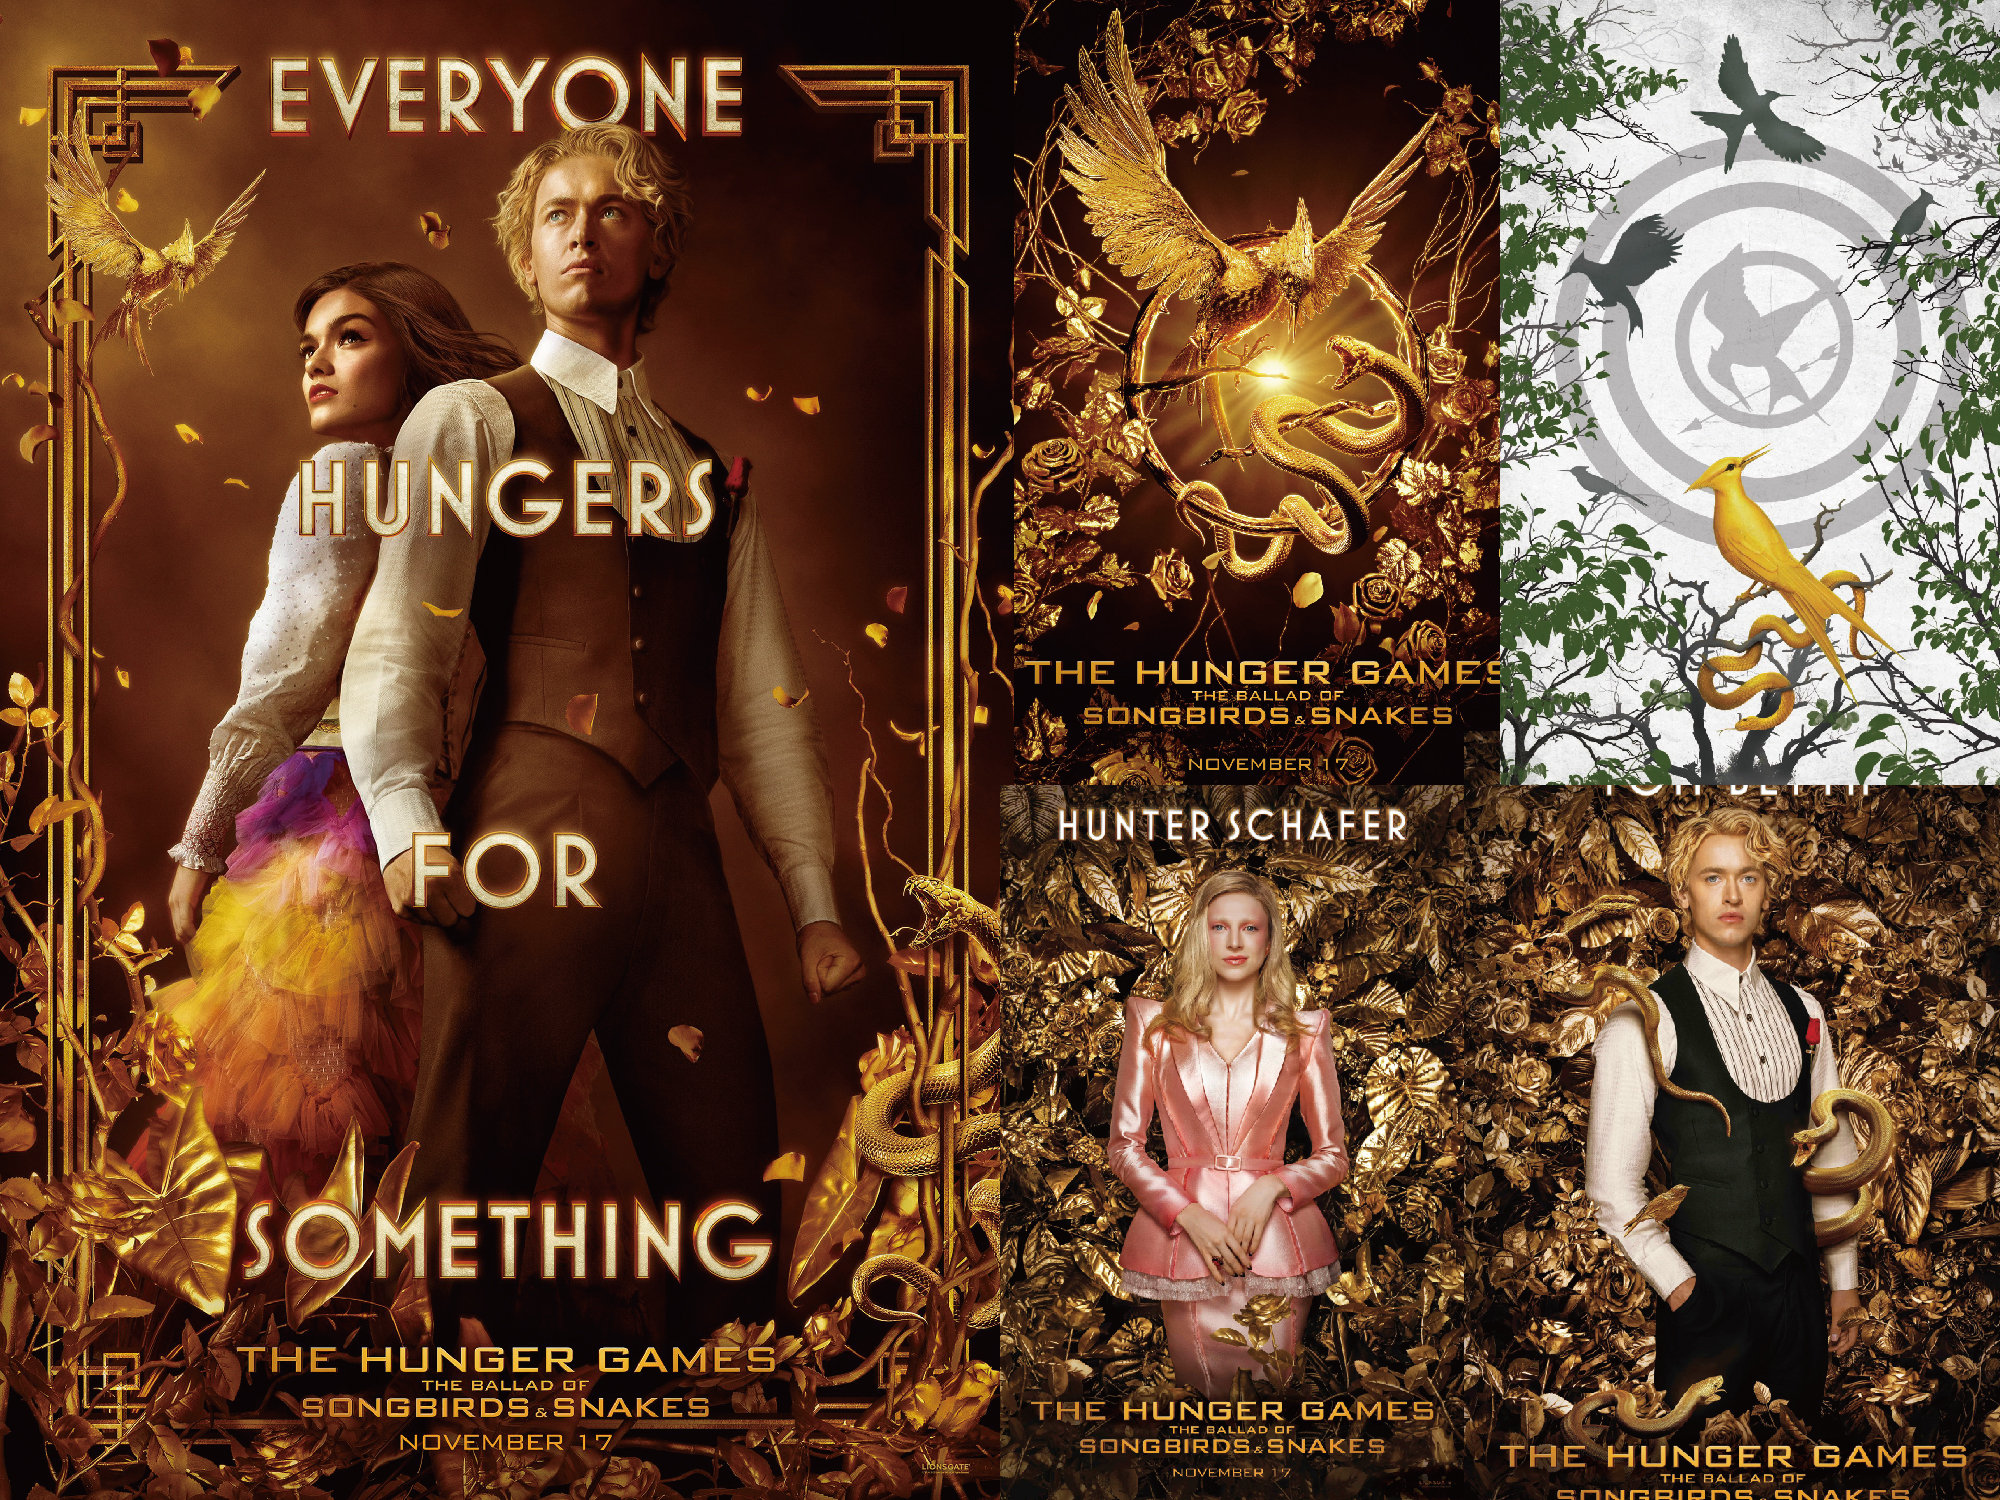 The Hunger Games Movie Poster Collection Bundle (Set of 4) 11x17